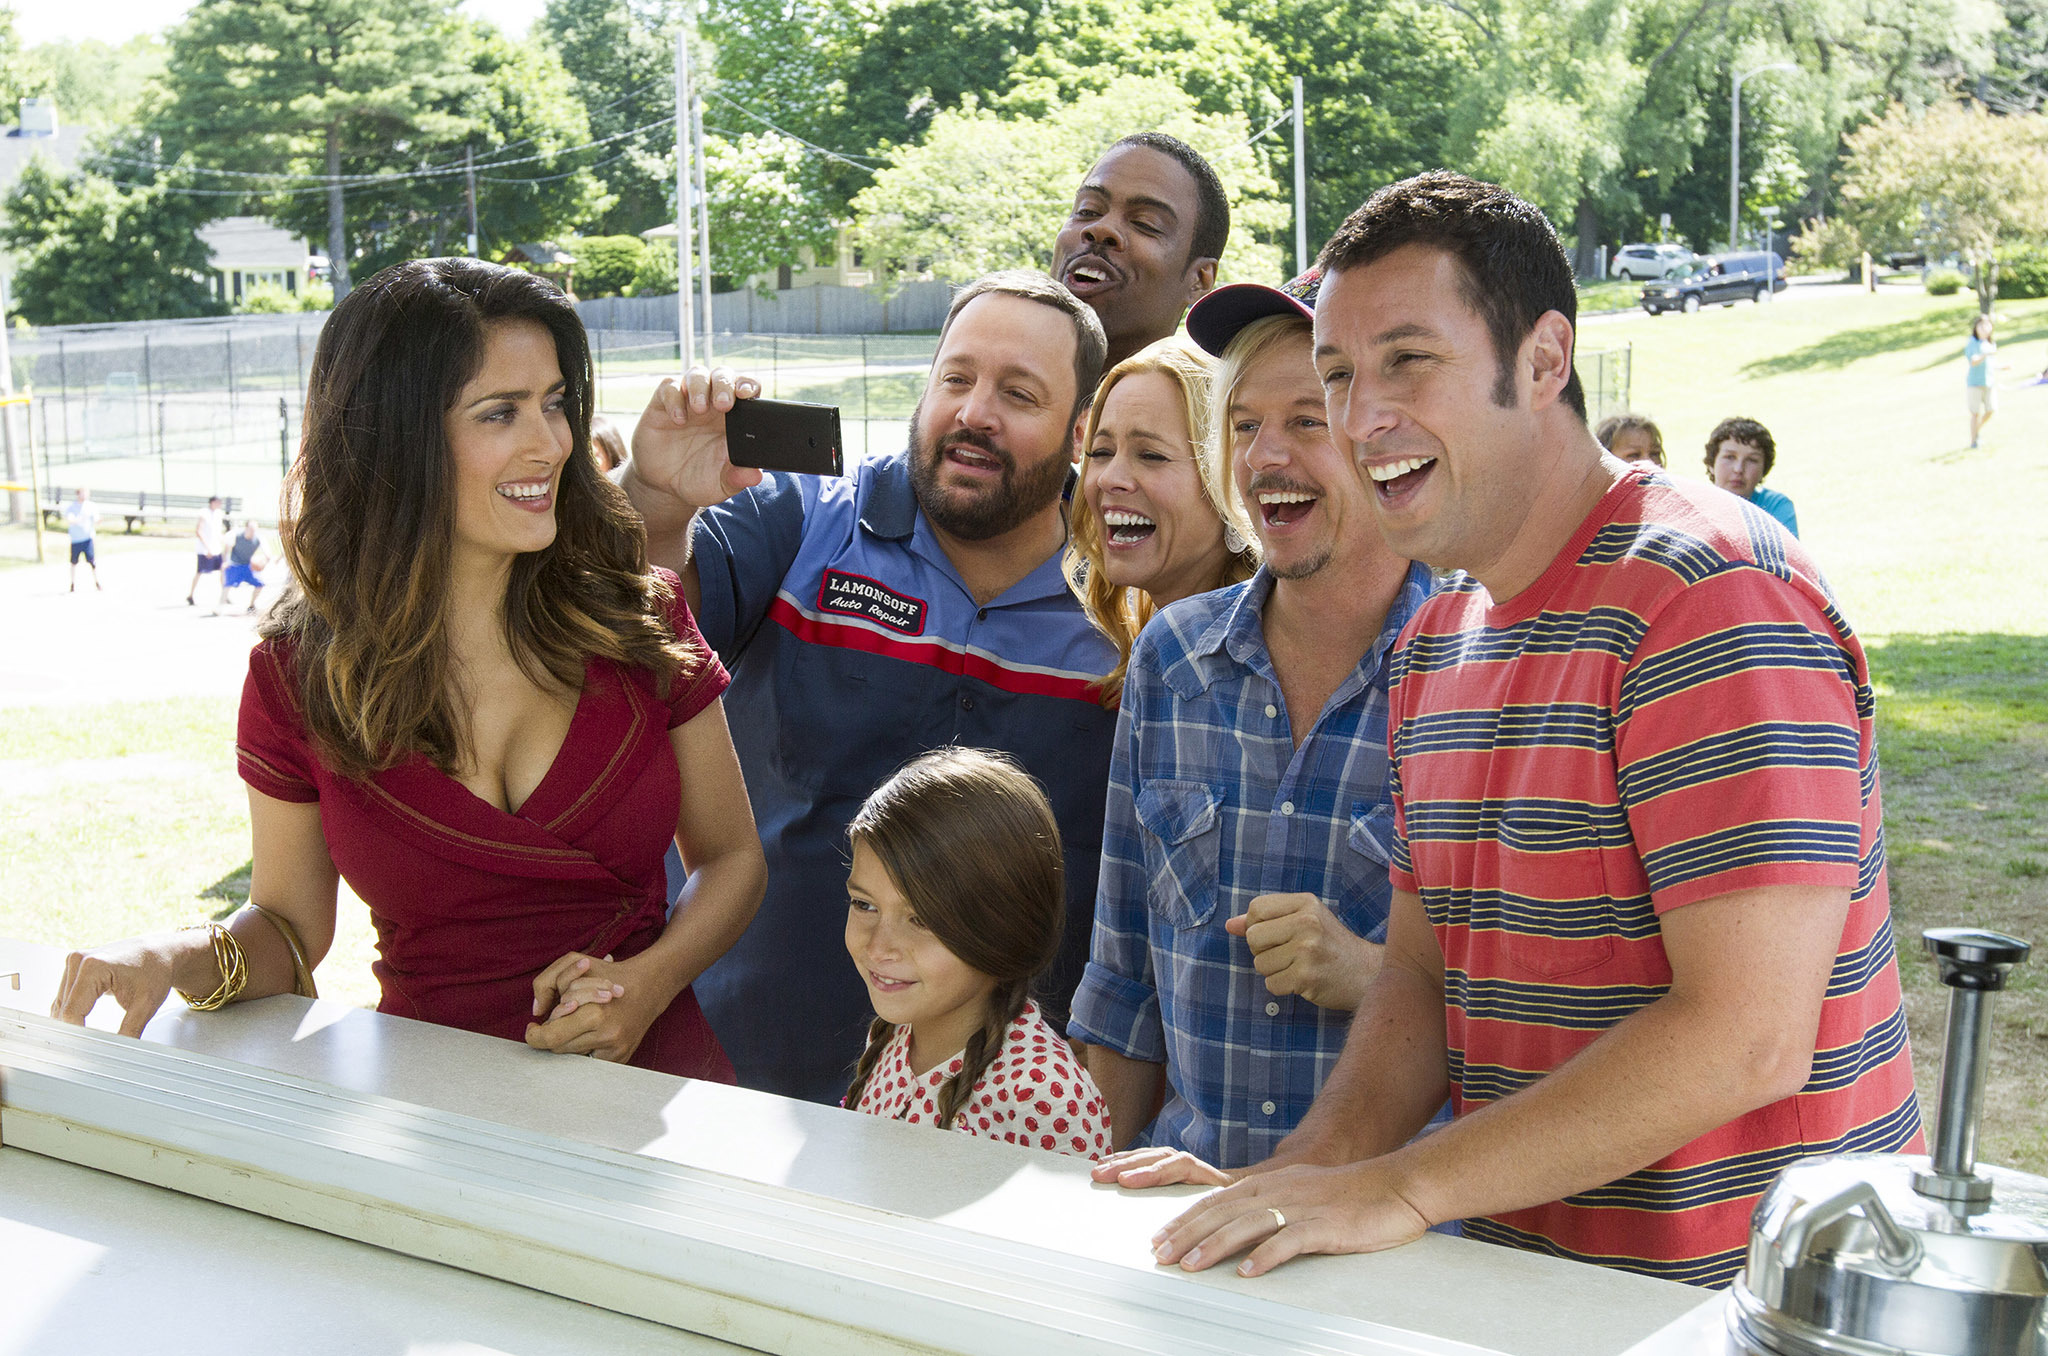 Grown Ups 2 Movie Review 2013 Directed By Dennis Dugan Movie Review